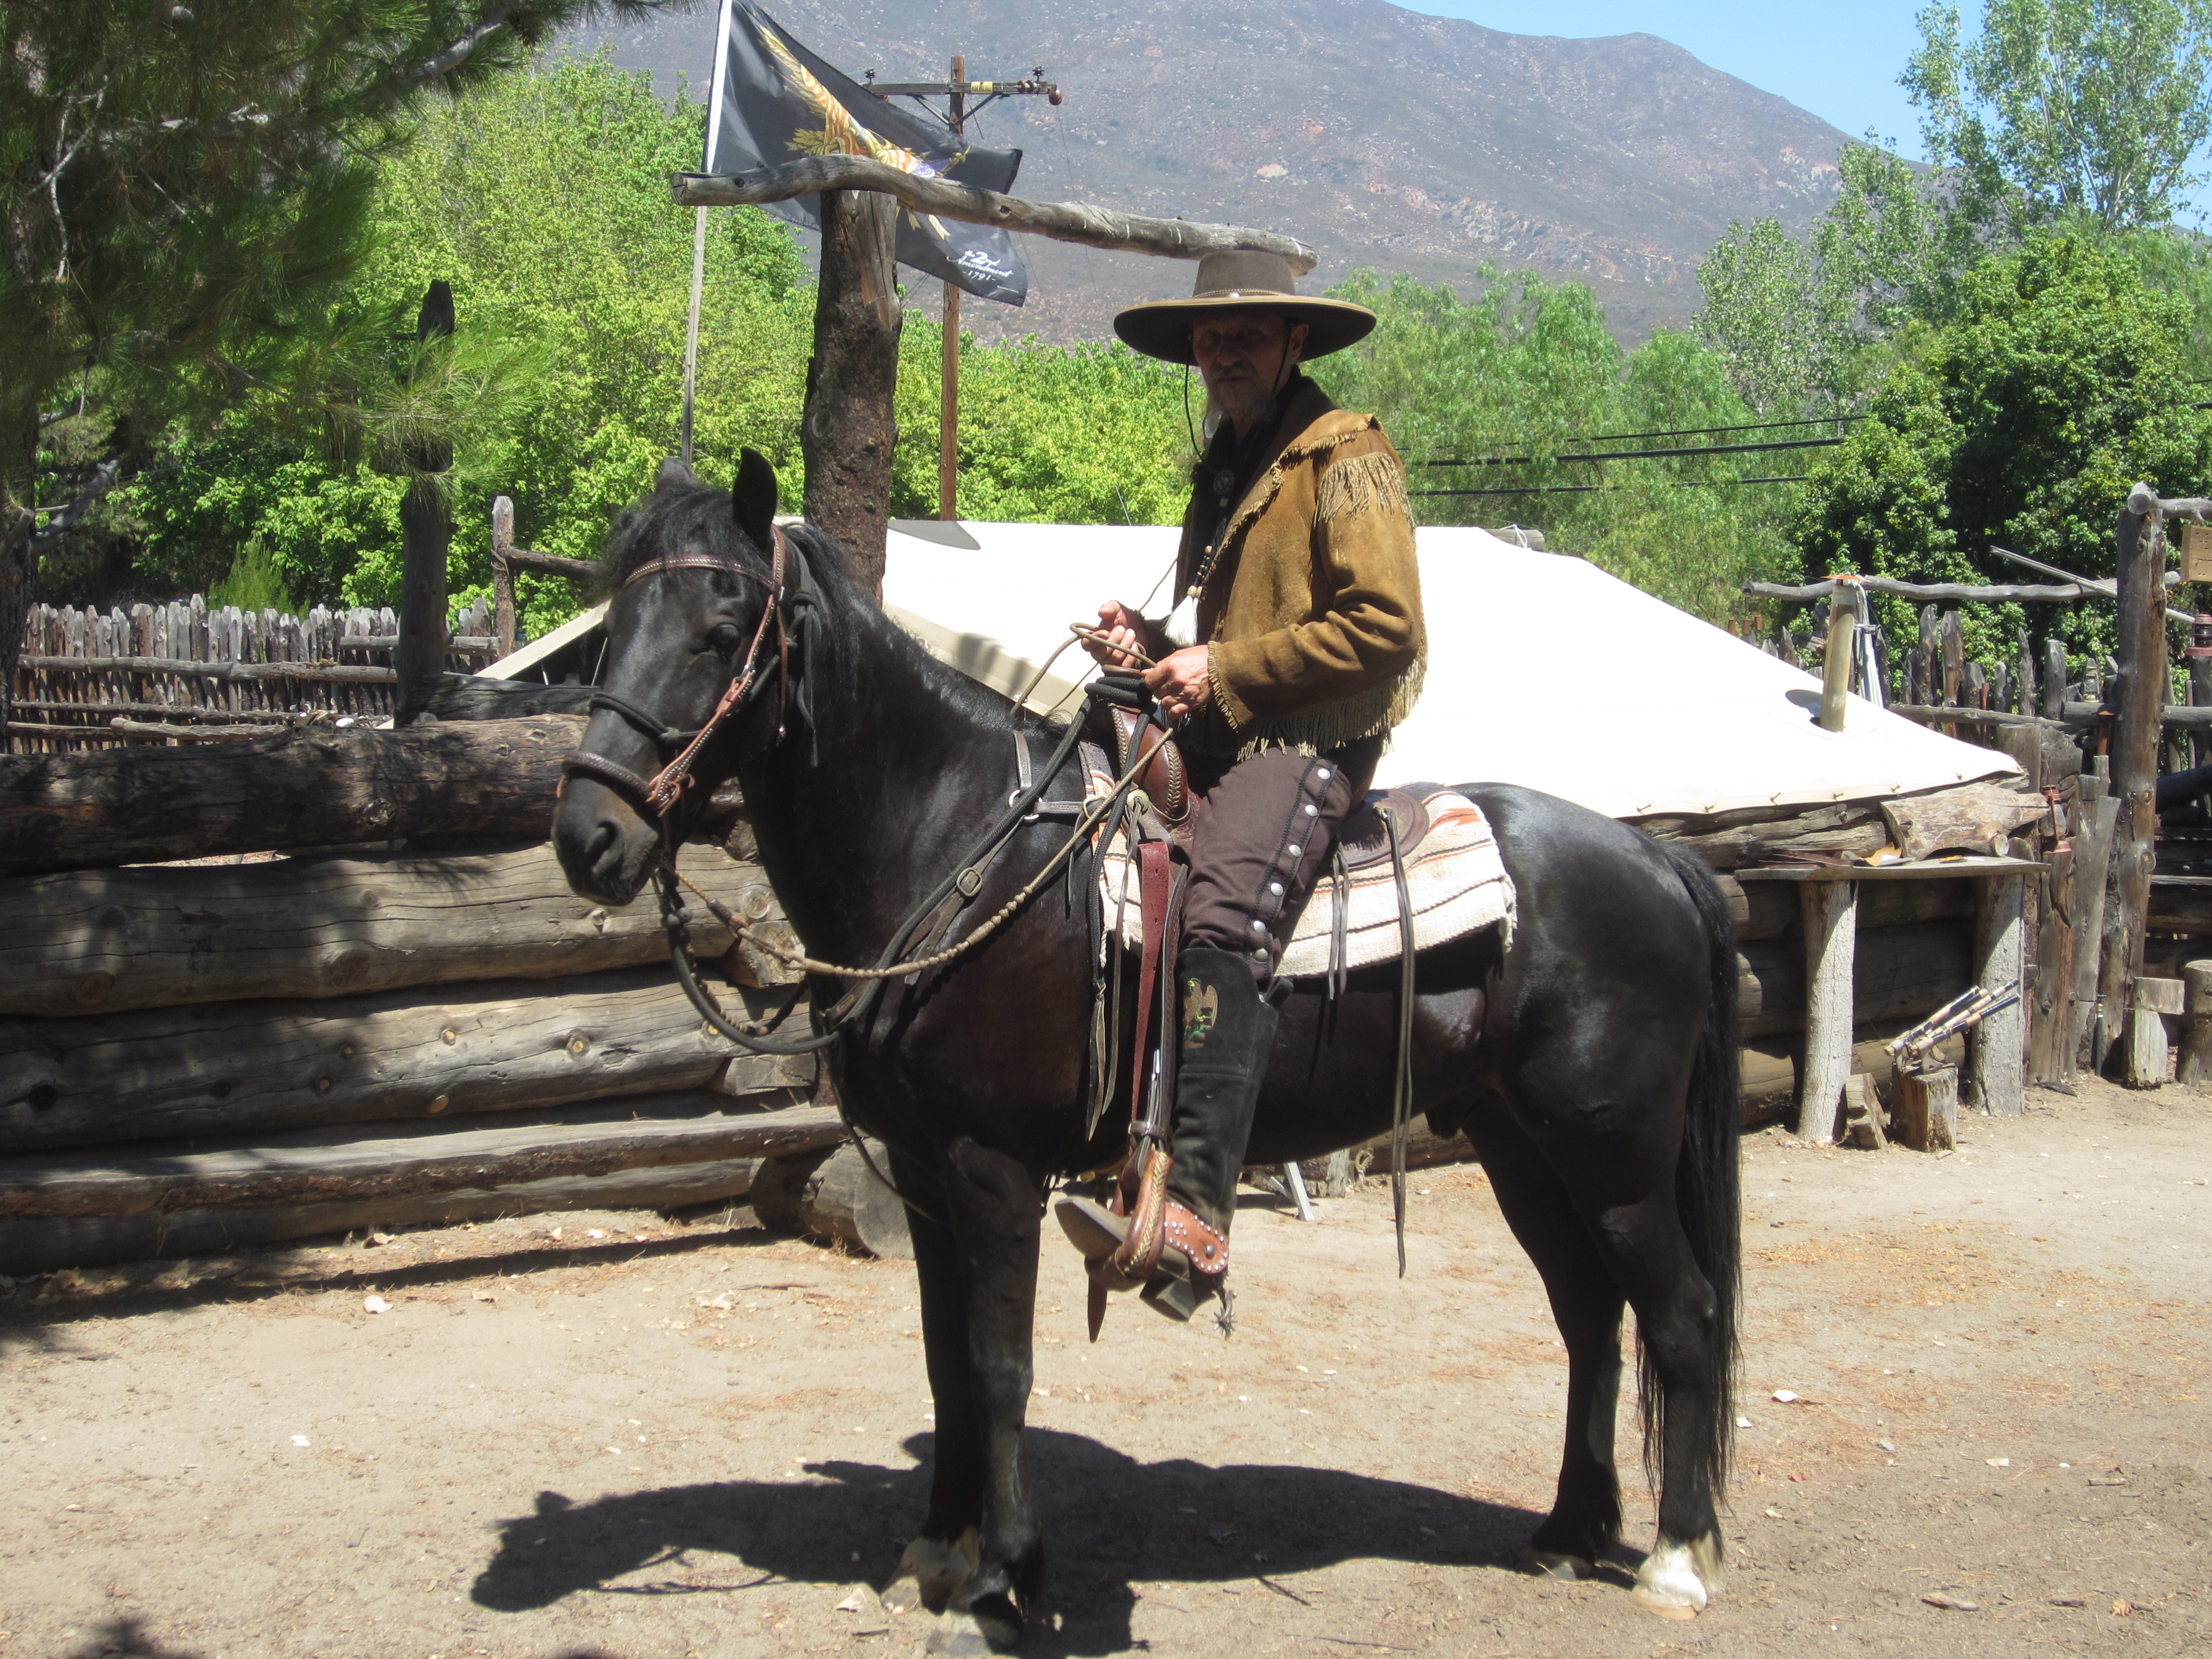 riding my mustang , location my 1800s fort. Alpine, Ca.